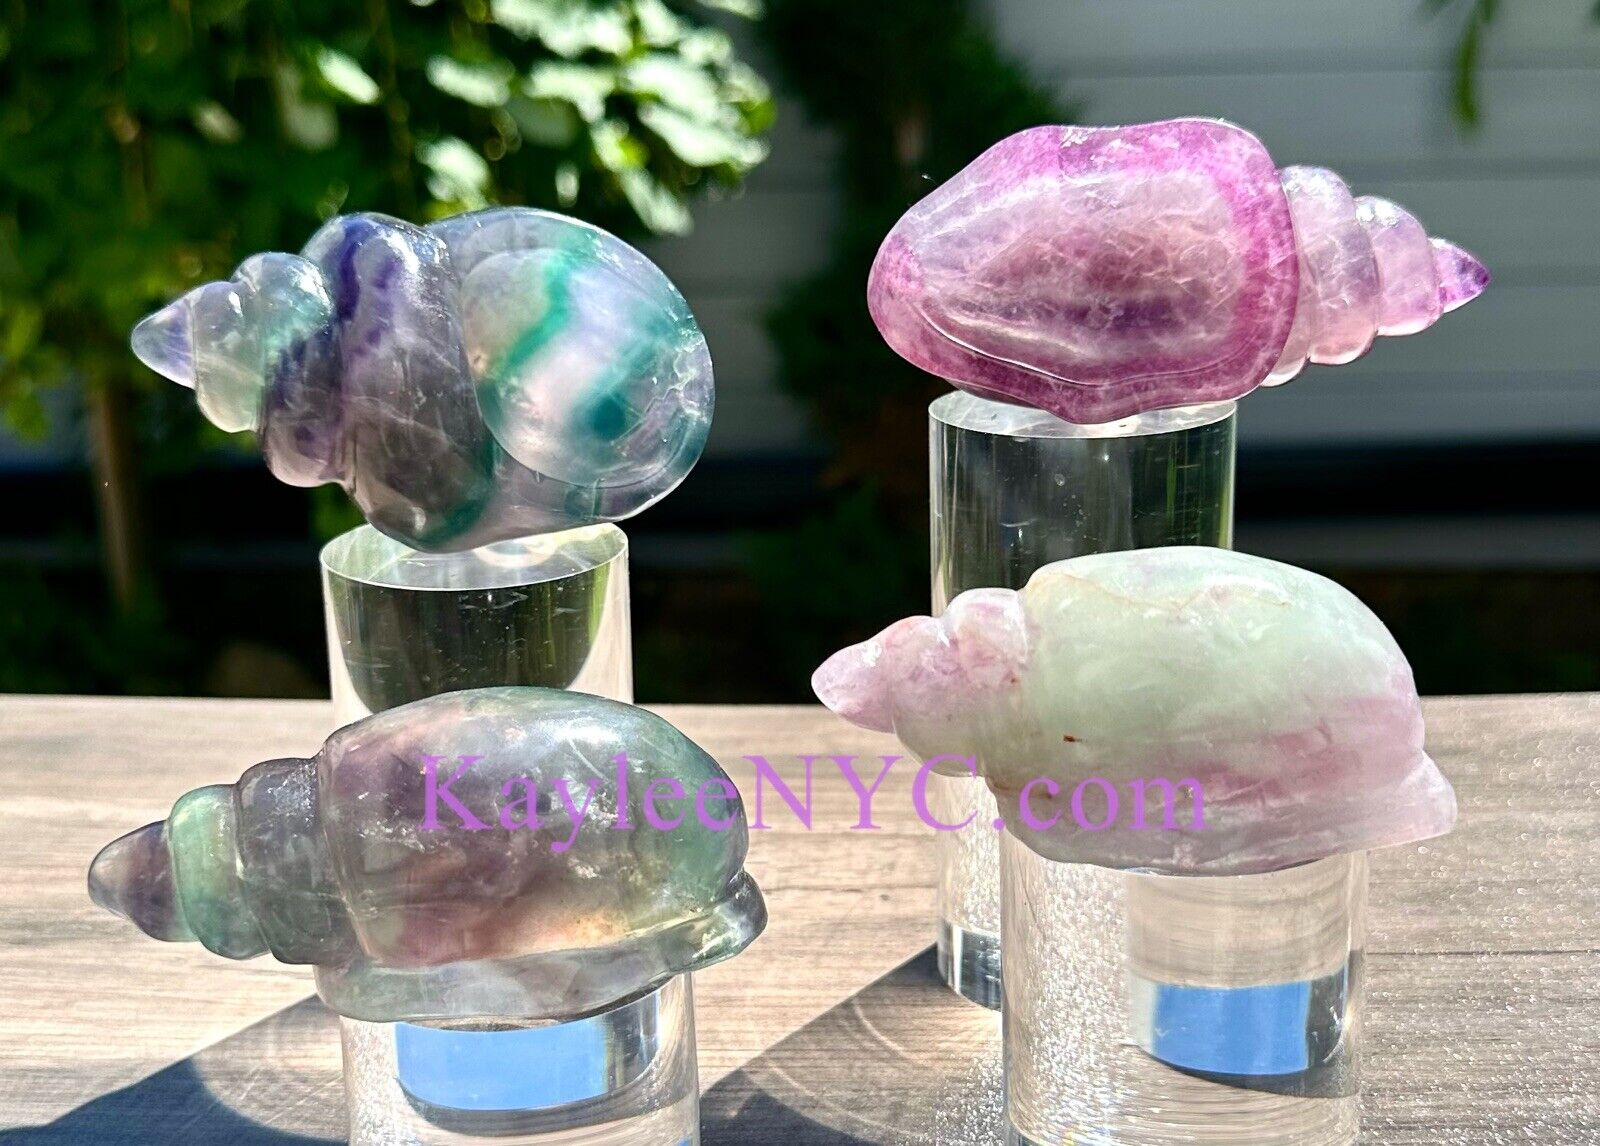 Wholesale Lot 4 Pcs Natural Fluorite Conch Crystal Healing Energy 1.9-2lbs